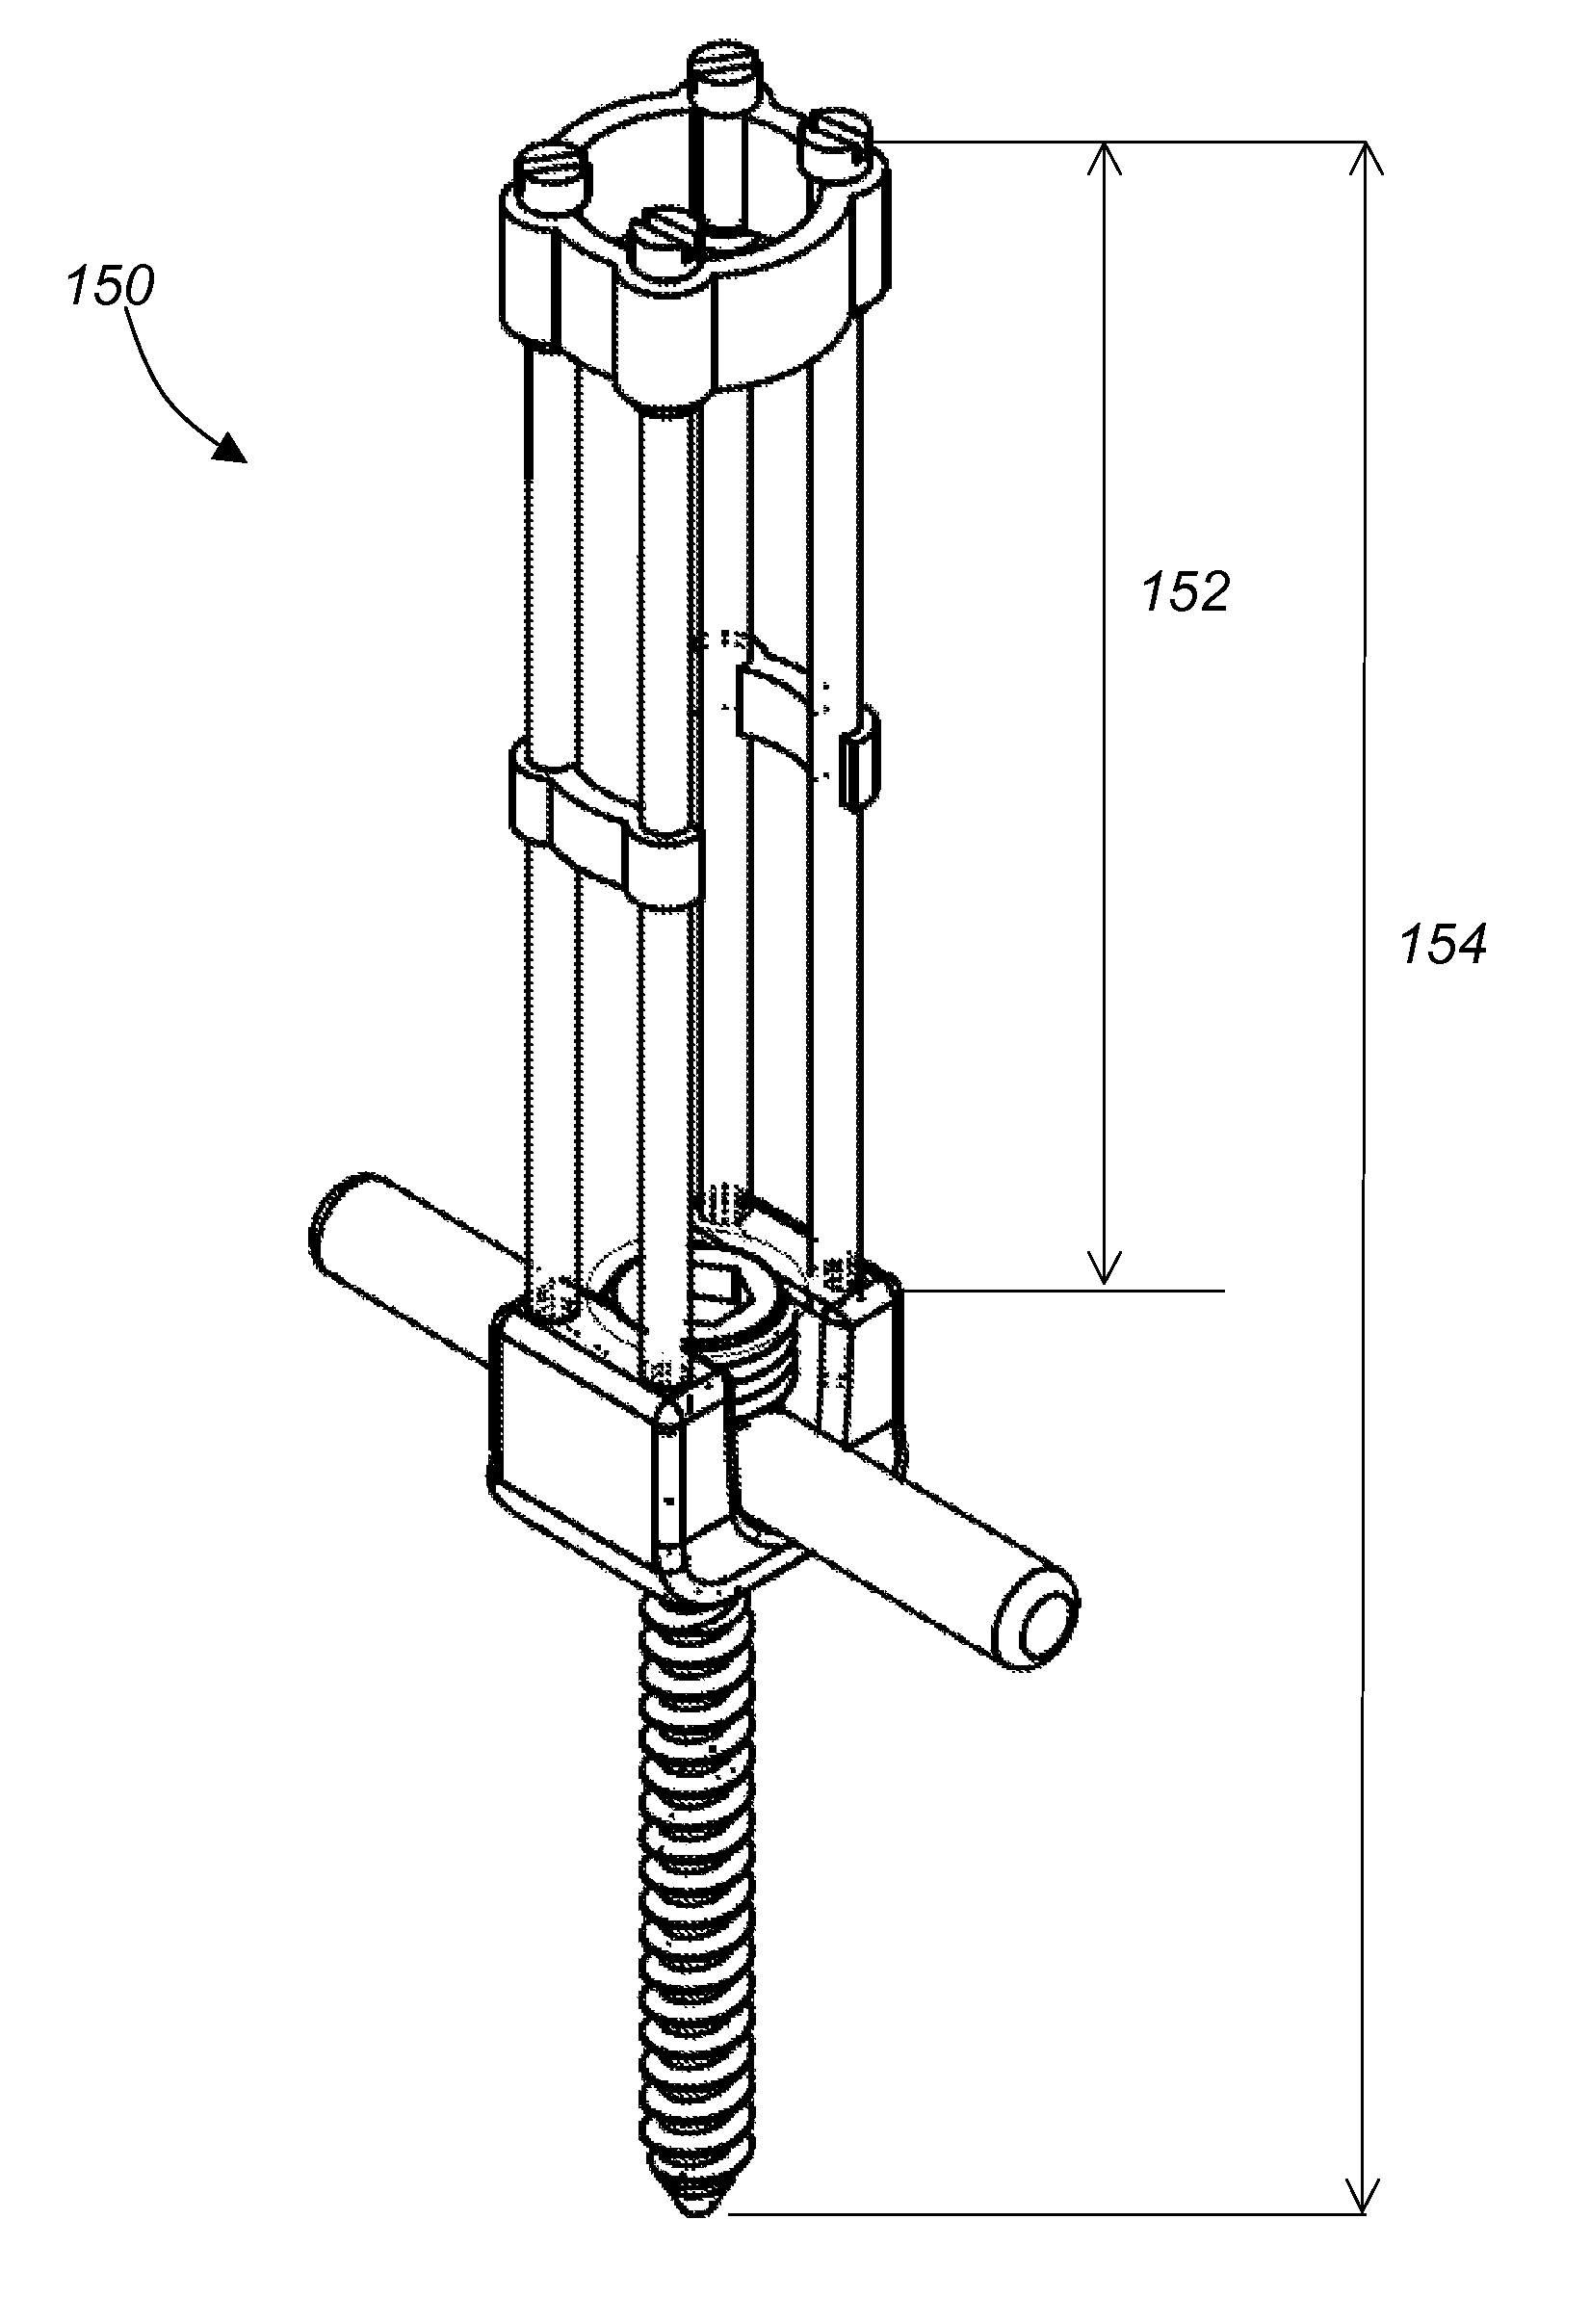 System and method for implanting spinal stabilization devices